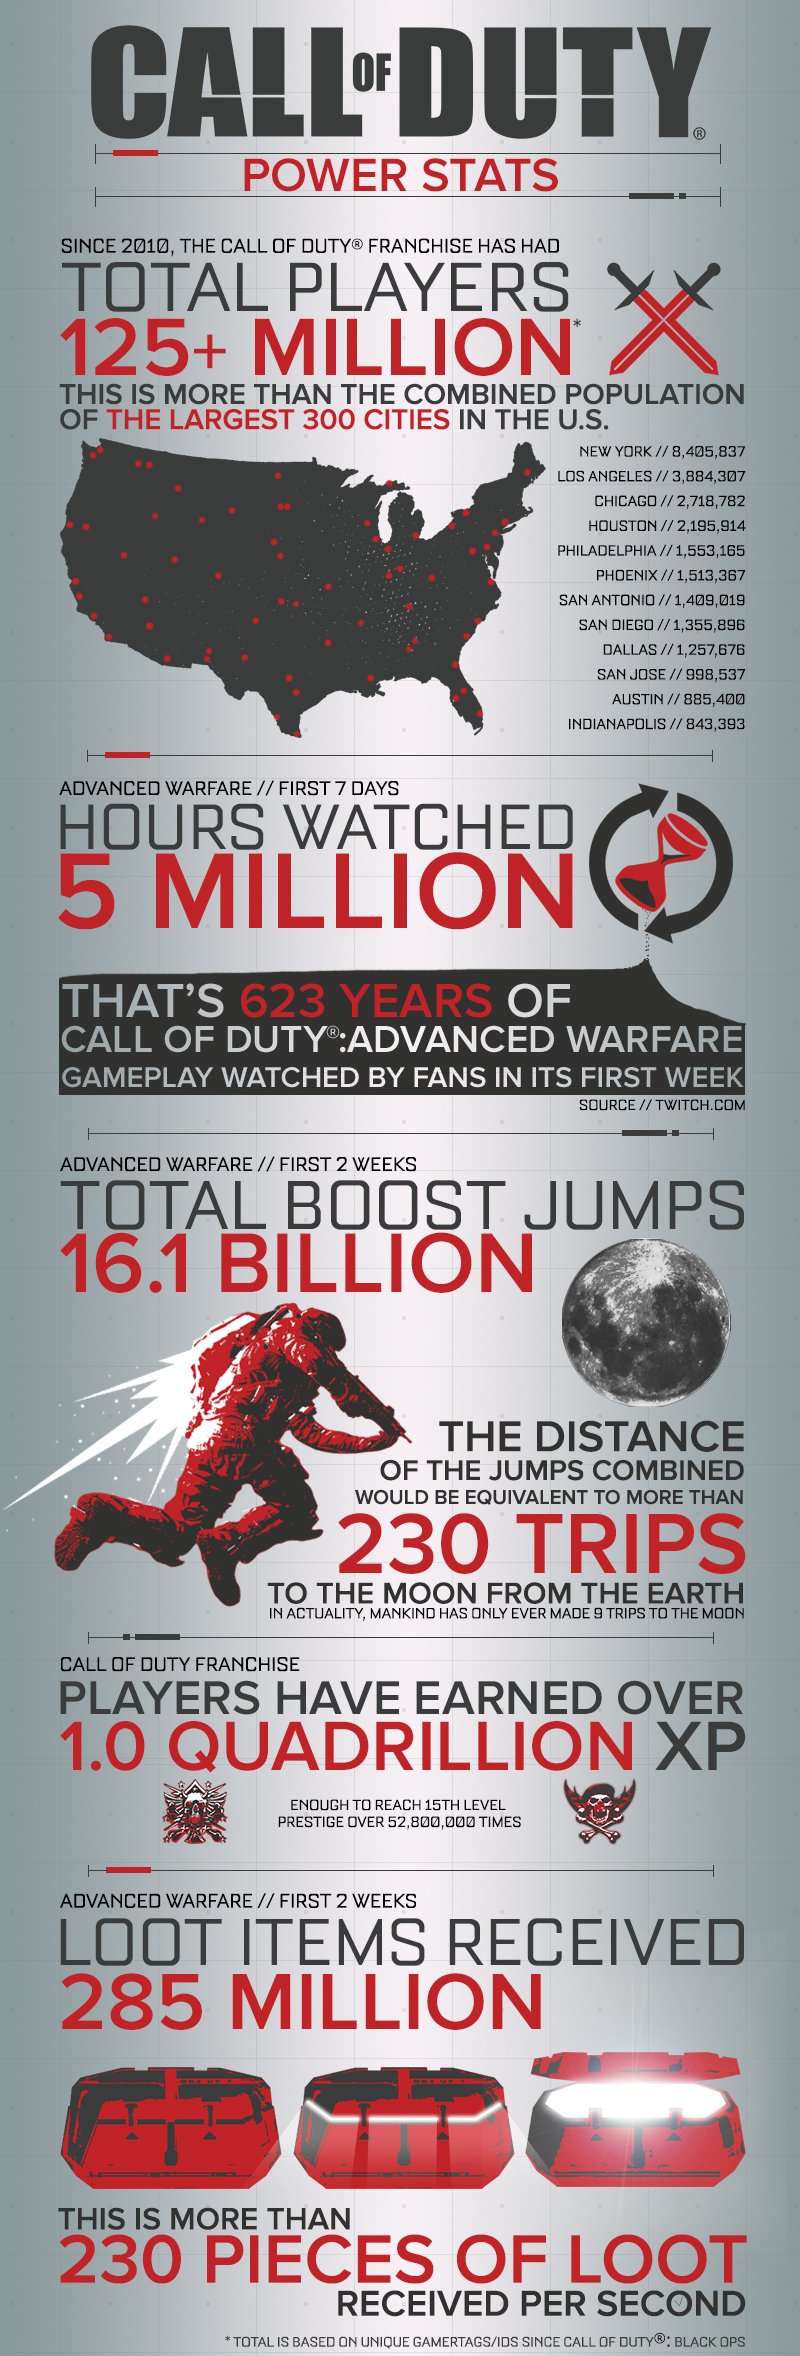 Call of Duty infographie